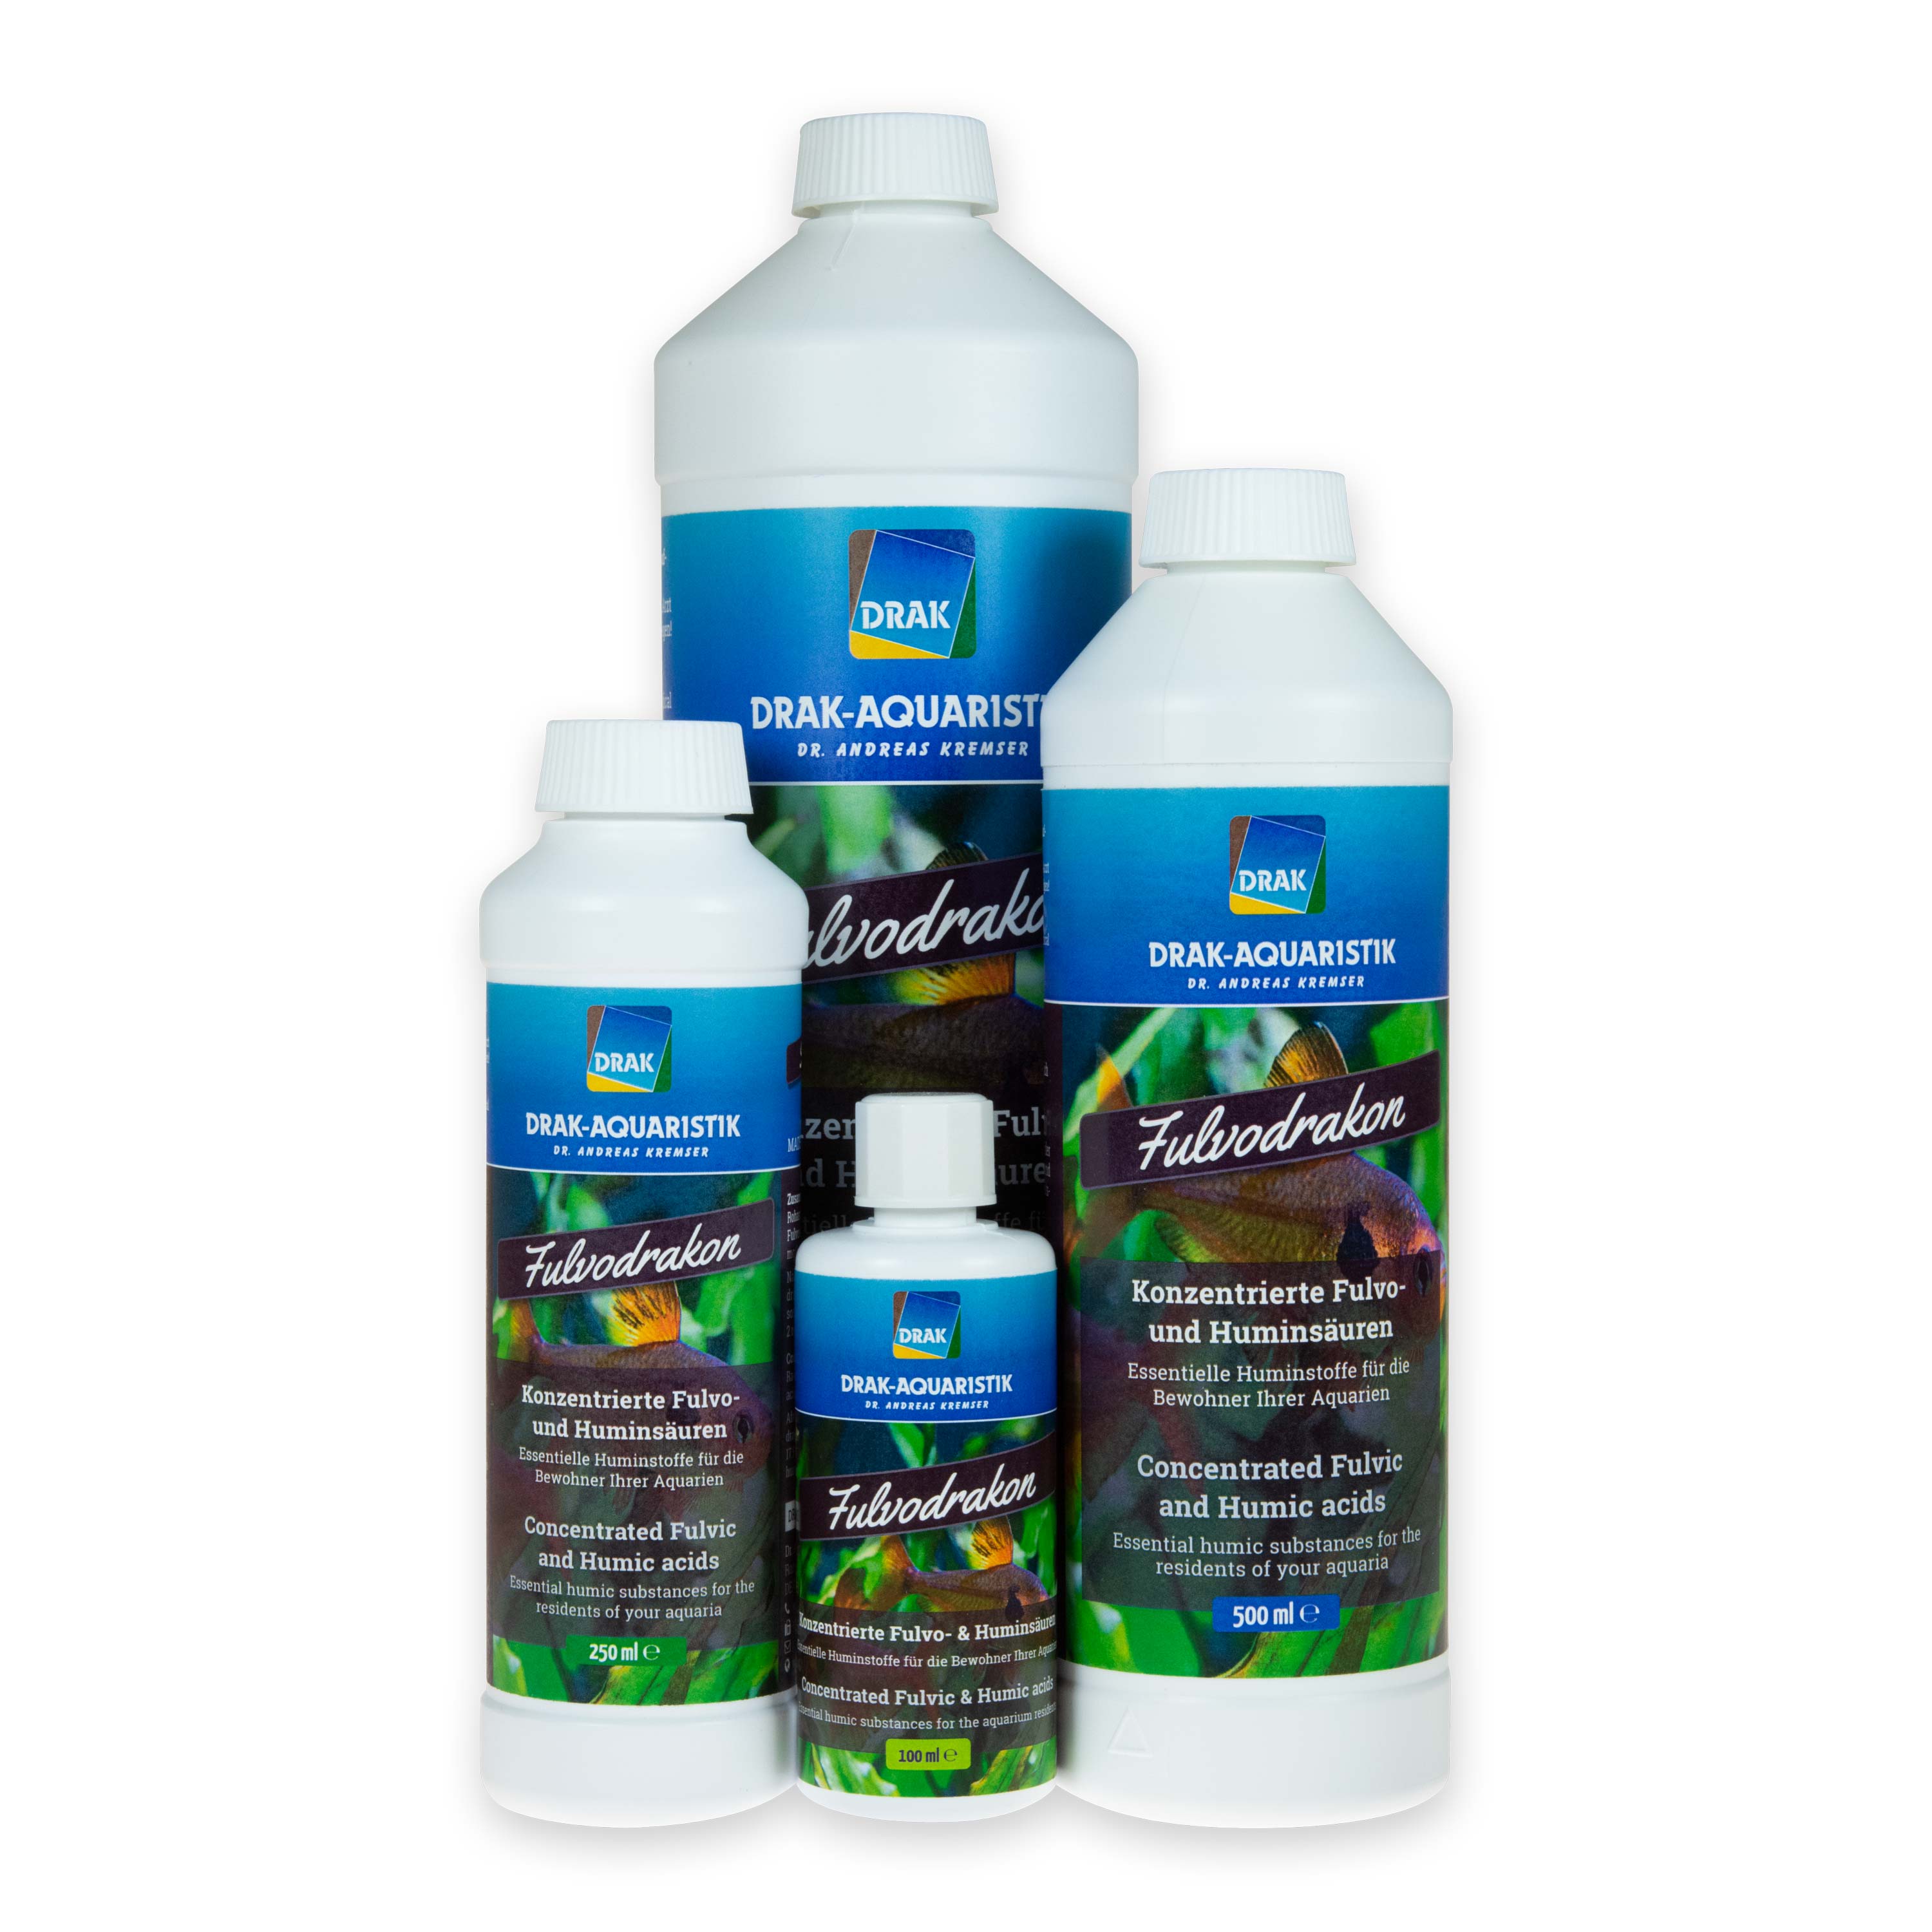 Fulvodrakon - Concentrated Fulvic and Humic acids